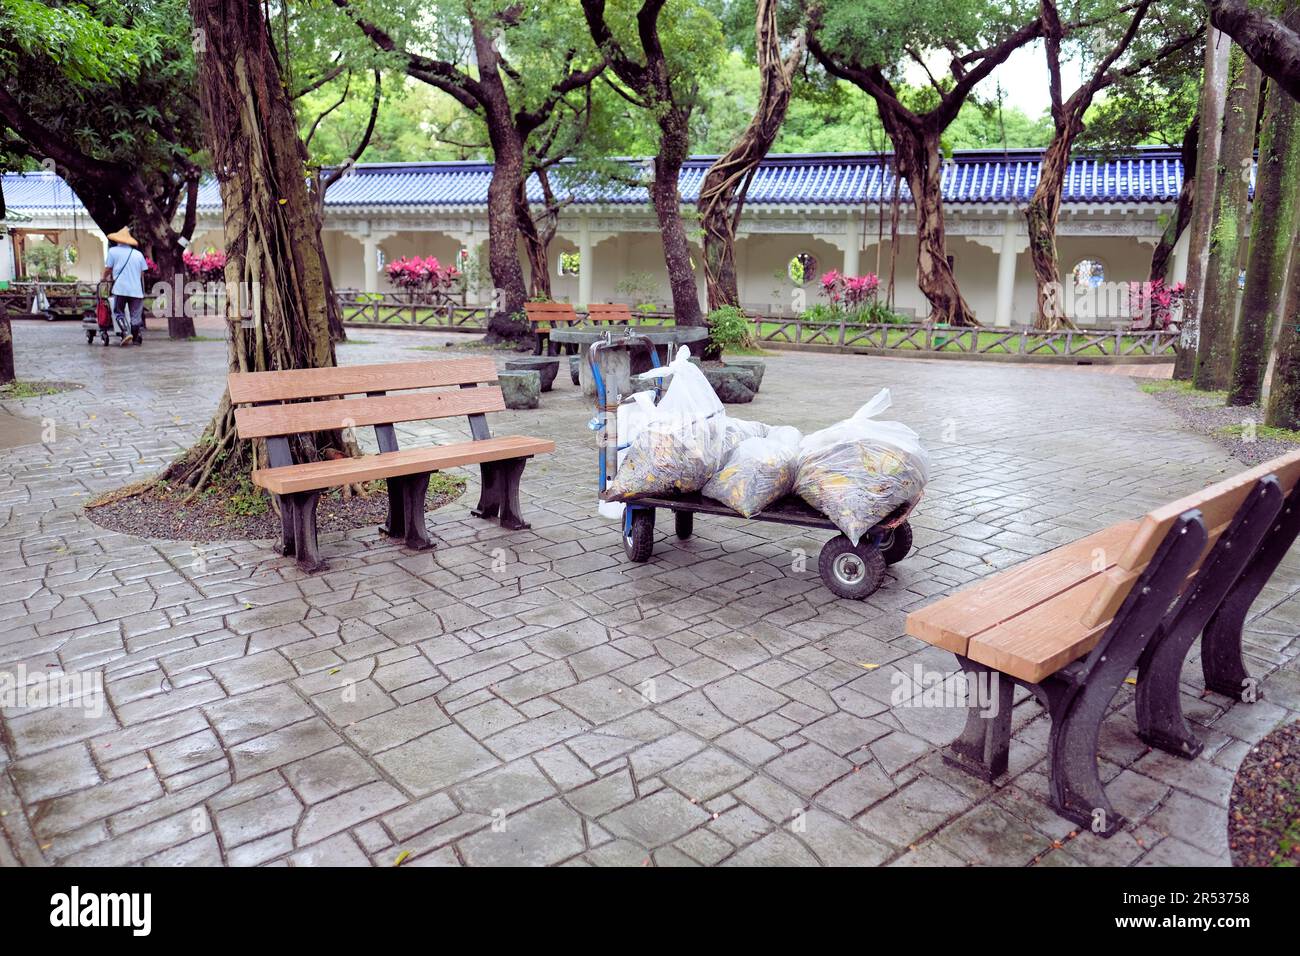 Flat bed cart with three plastic bags containing raked leaves and other yard waste; Chiang Kai-Shek Memorial Hall, Taipei, Taiwan; park maintenance. Stock Photo